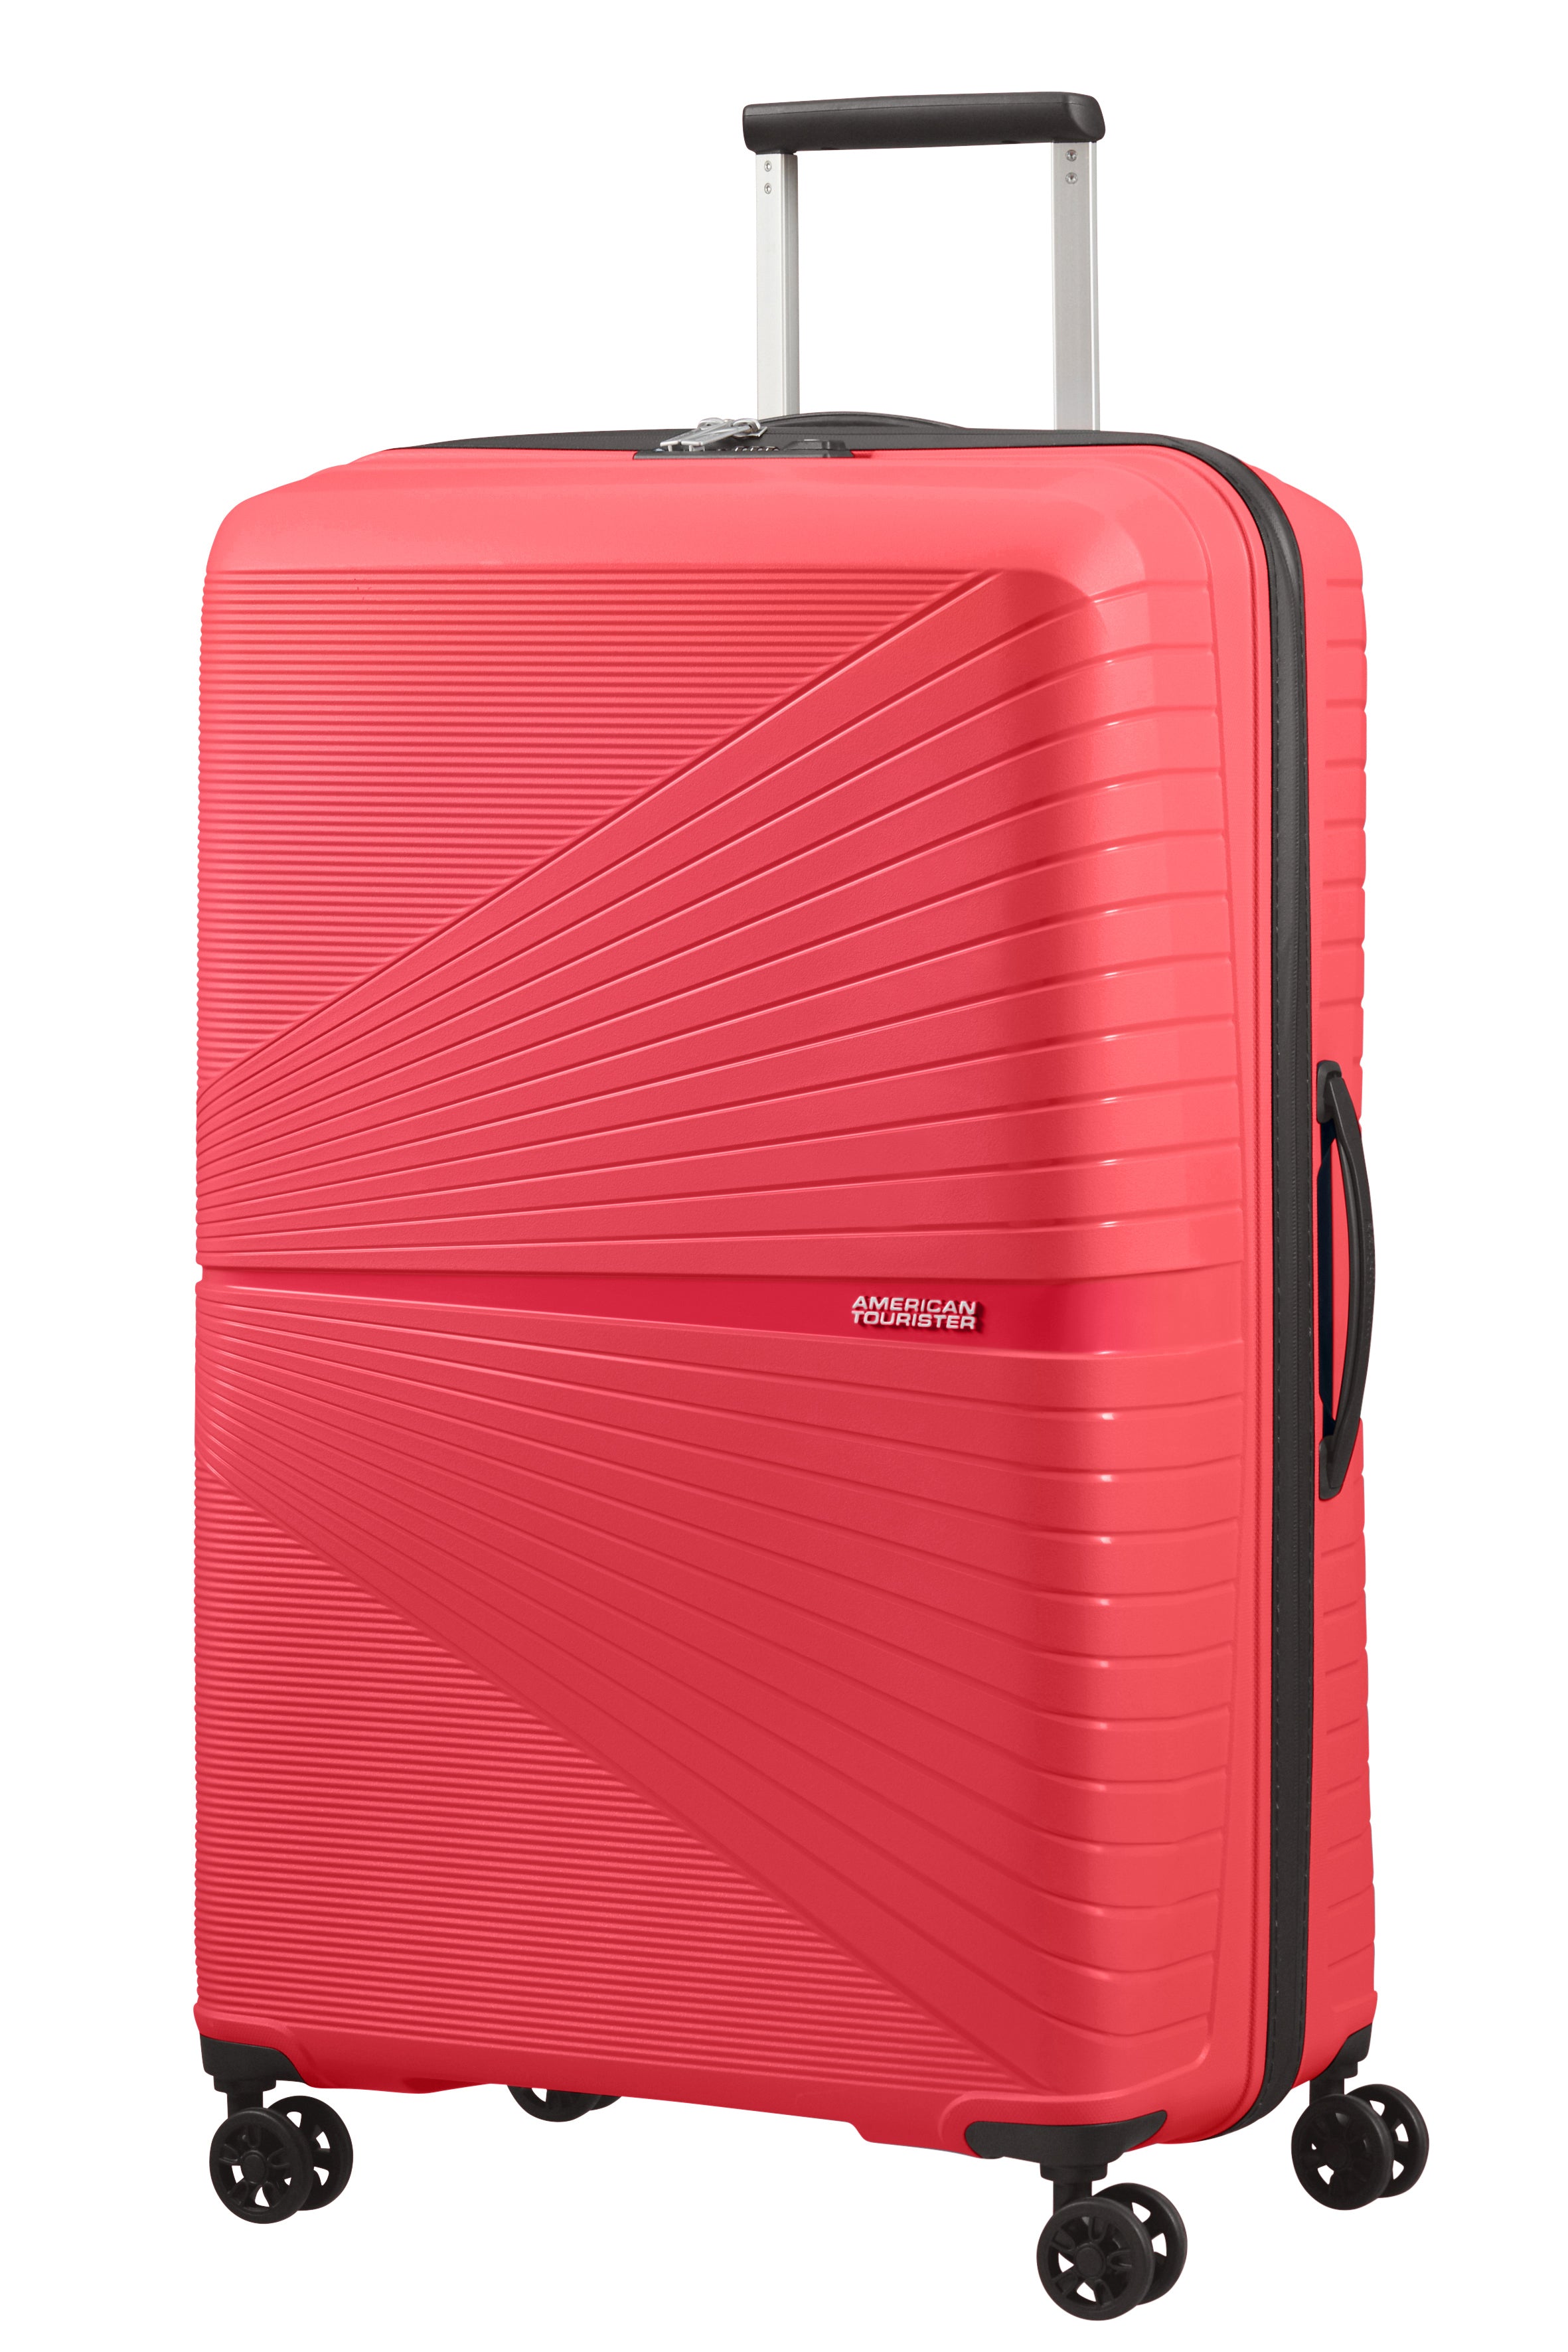 American Tourister - Airconic 77cm Large 4 Wheel Hard Suitcase - Paradise Pink-8